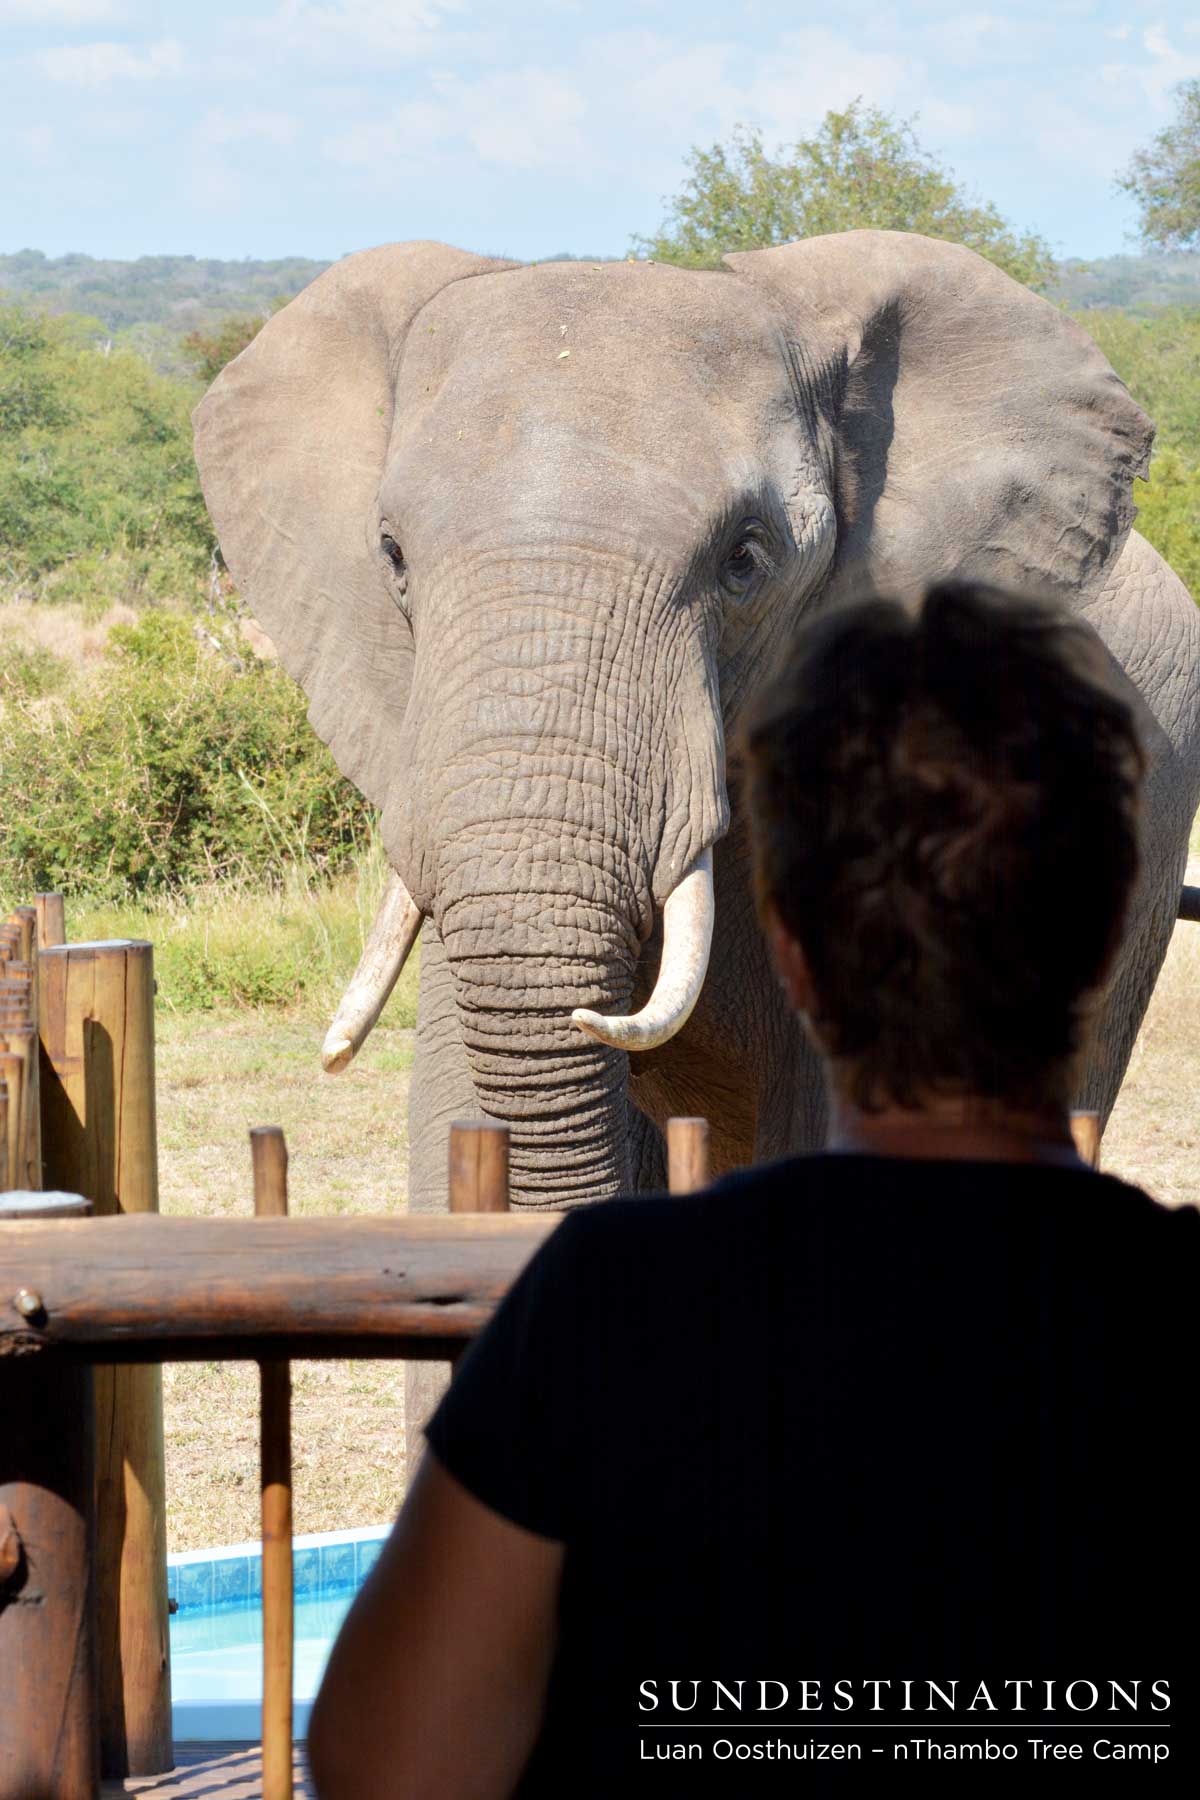 Behind the wooden balustrade, guests watch the elephant come towards the pool